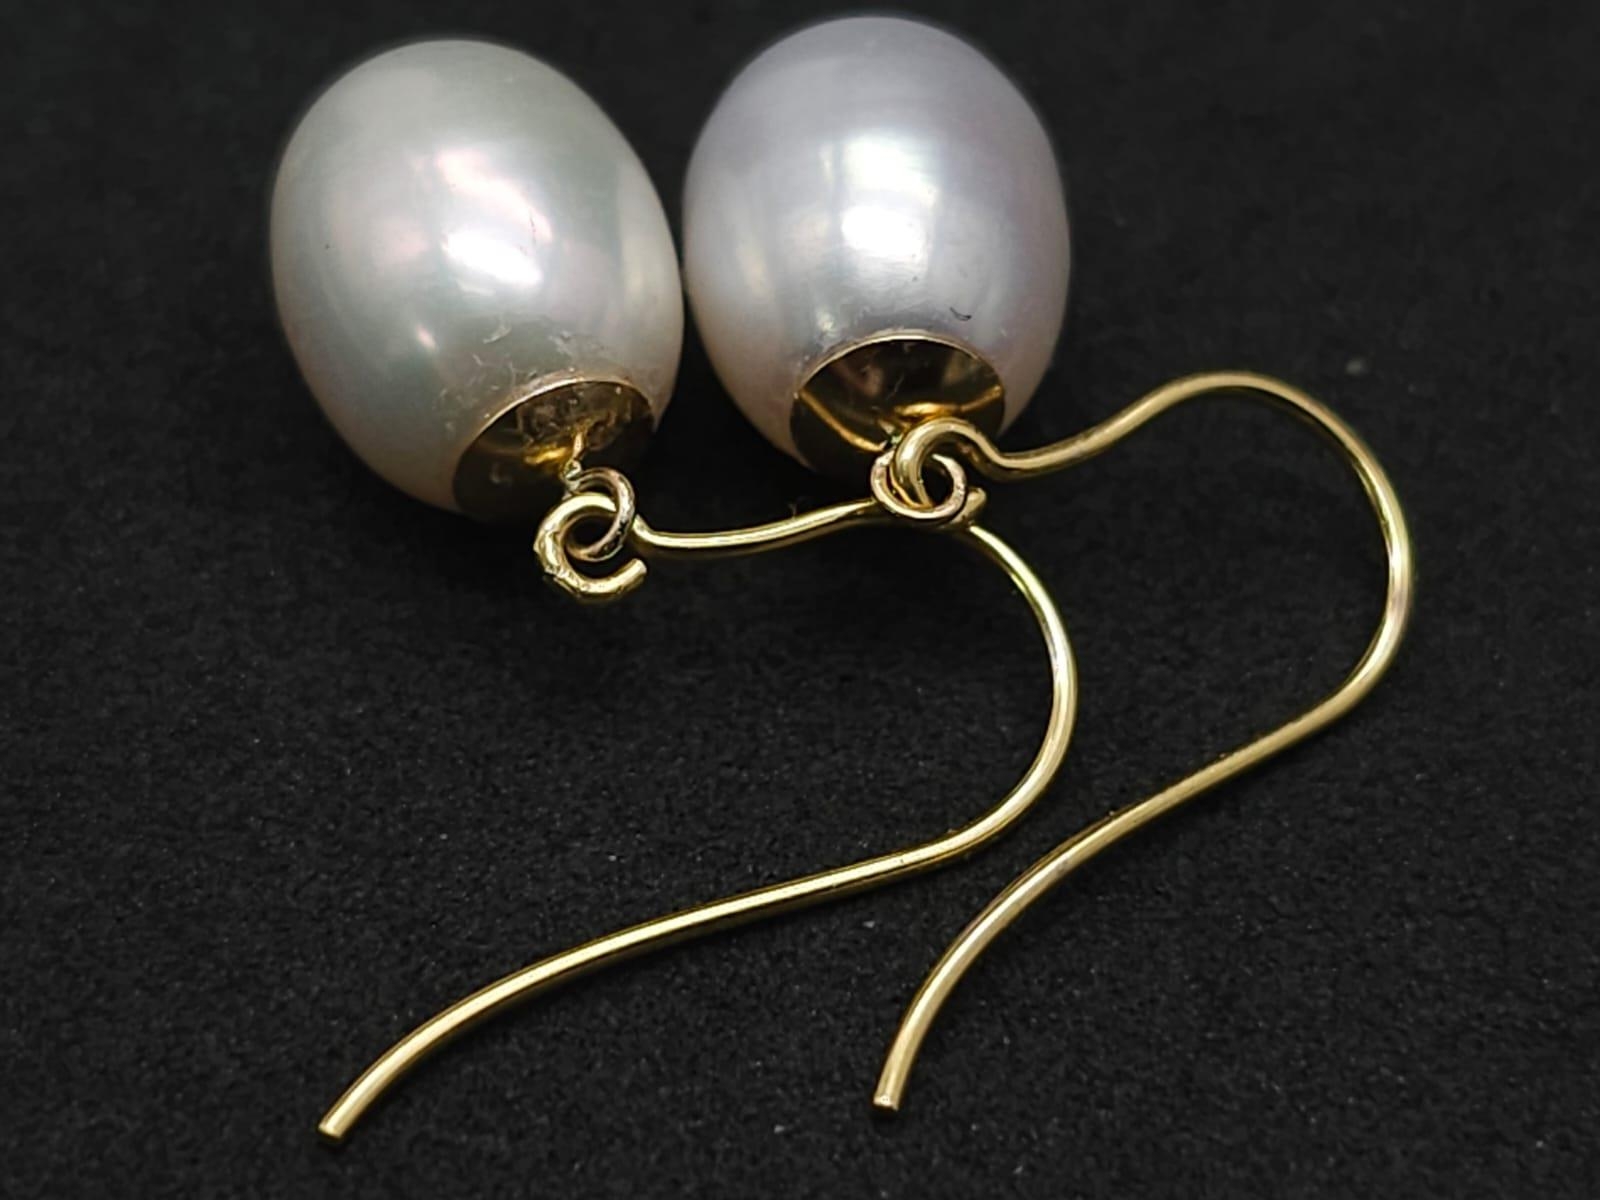 A Pair of 9K Yellow Gold and South Sea Pearl Earrings. 3.7g total weight. - Image 4 of 6